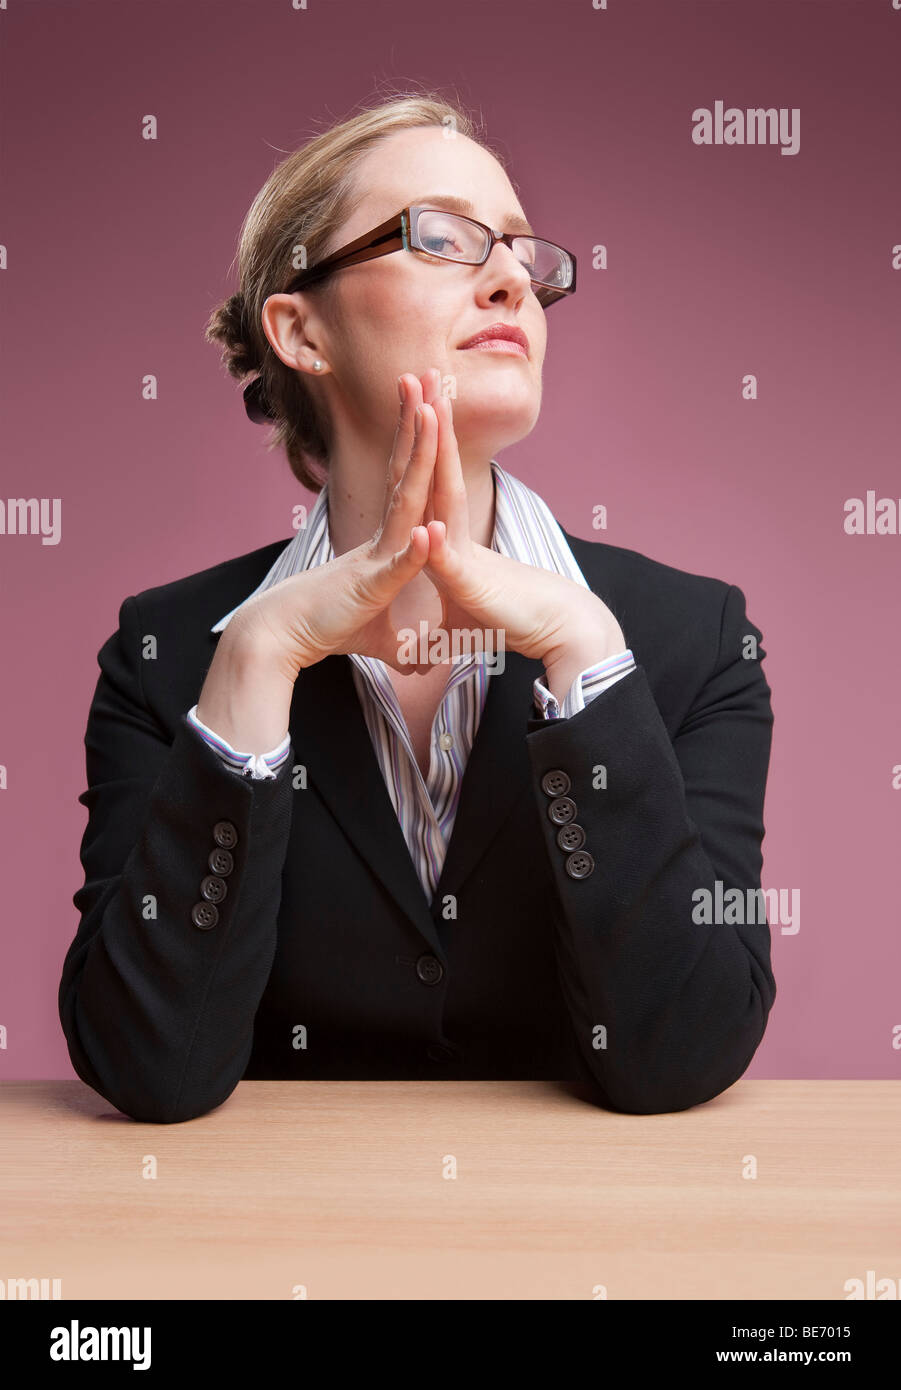 Female boss looking at camera with confident expression Stock Photo